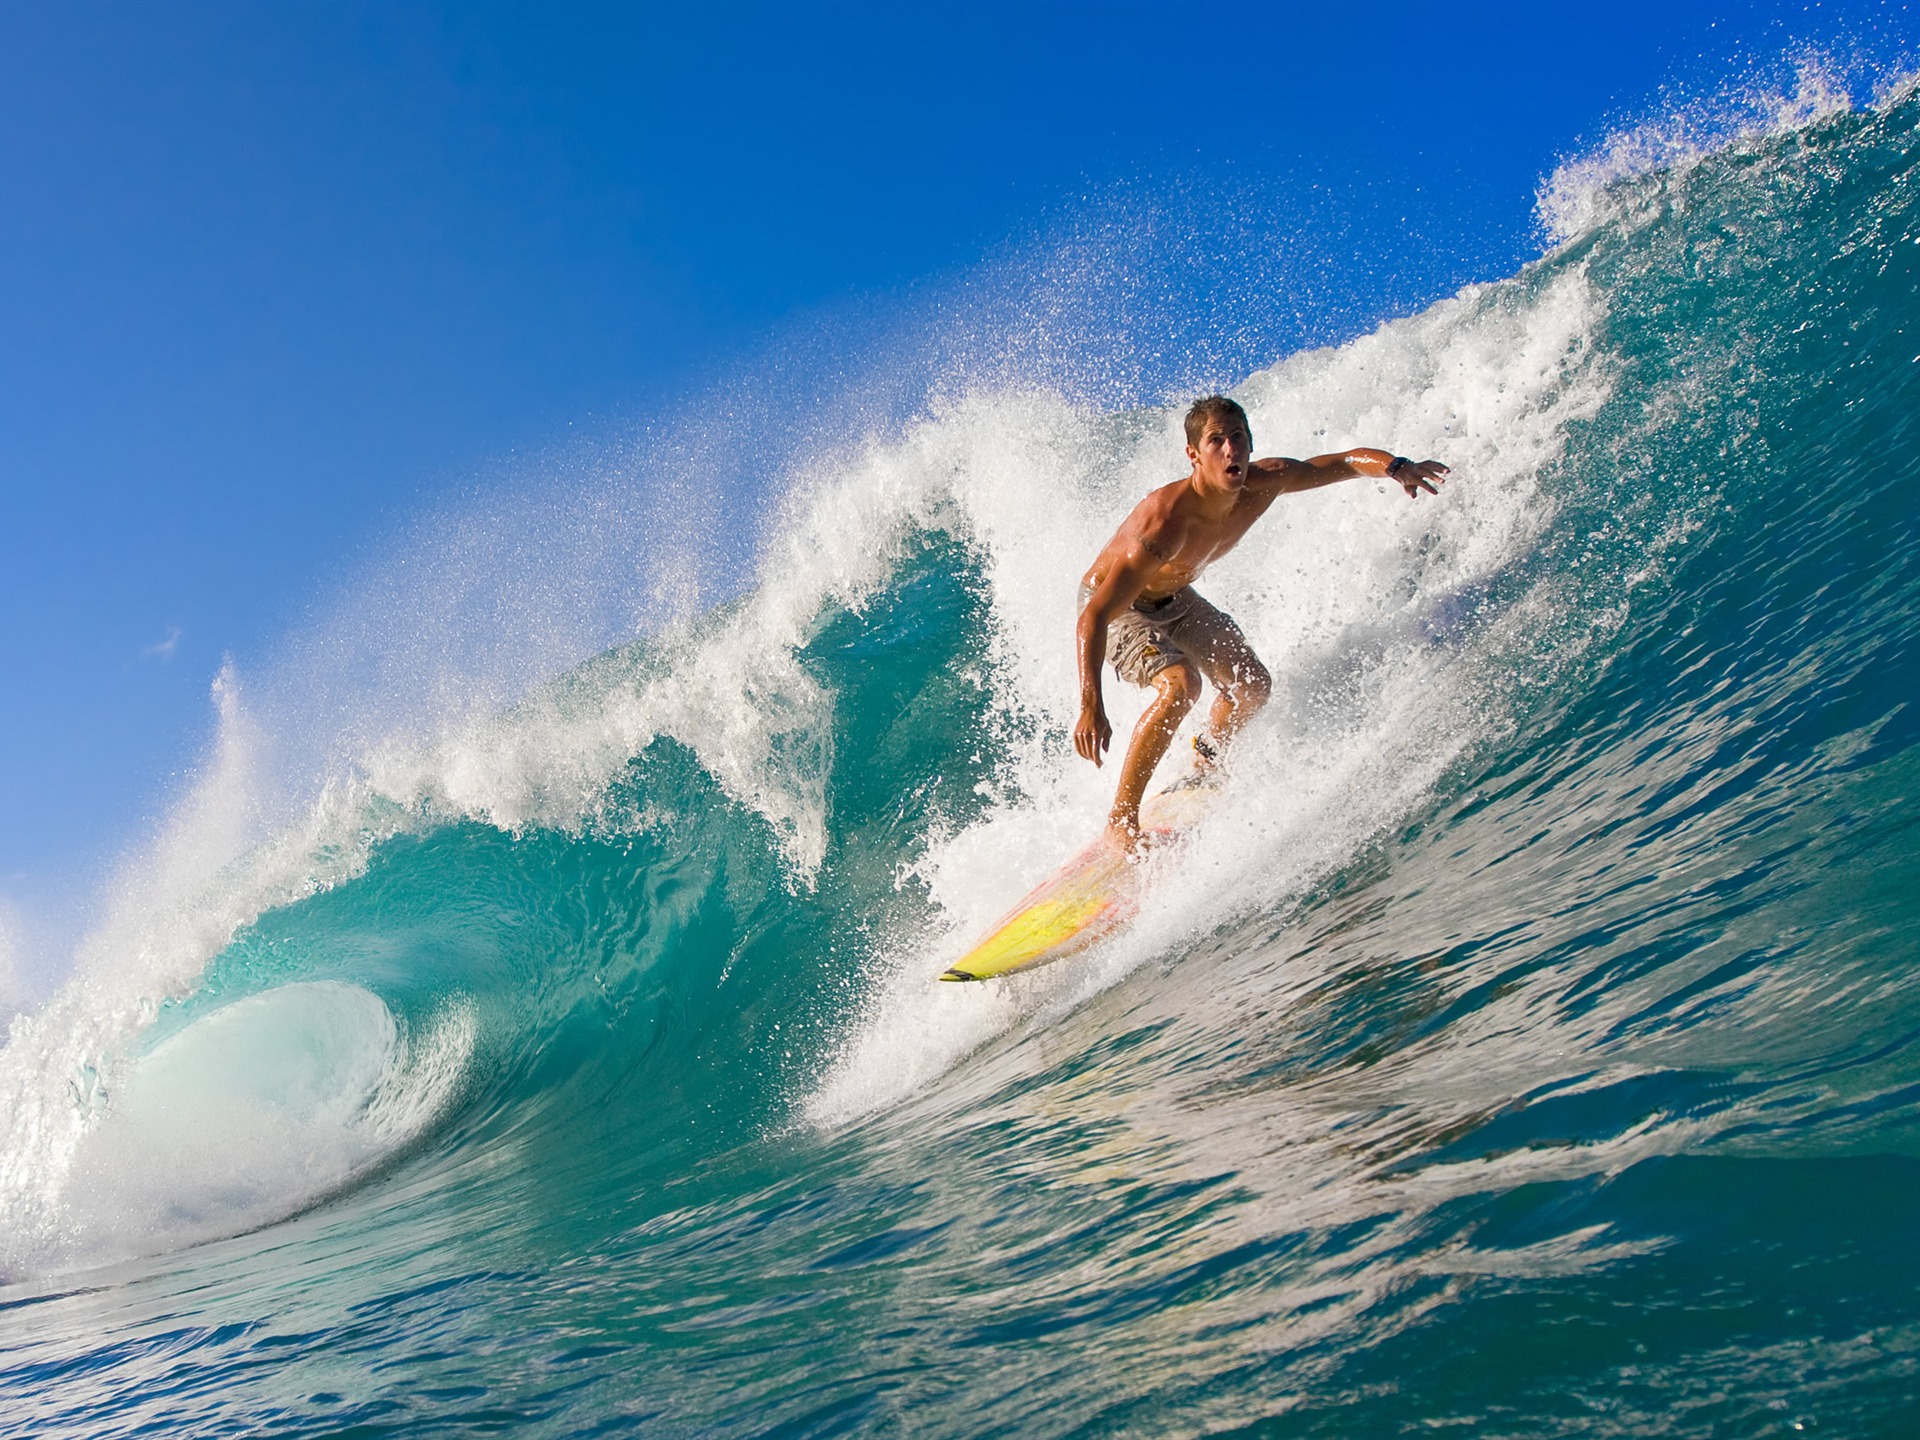  surfing   Extreme sports wallpaper   1920x1440 wallpaper download